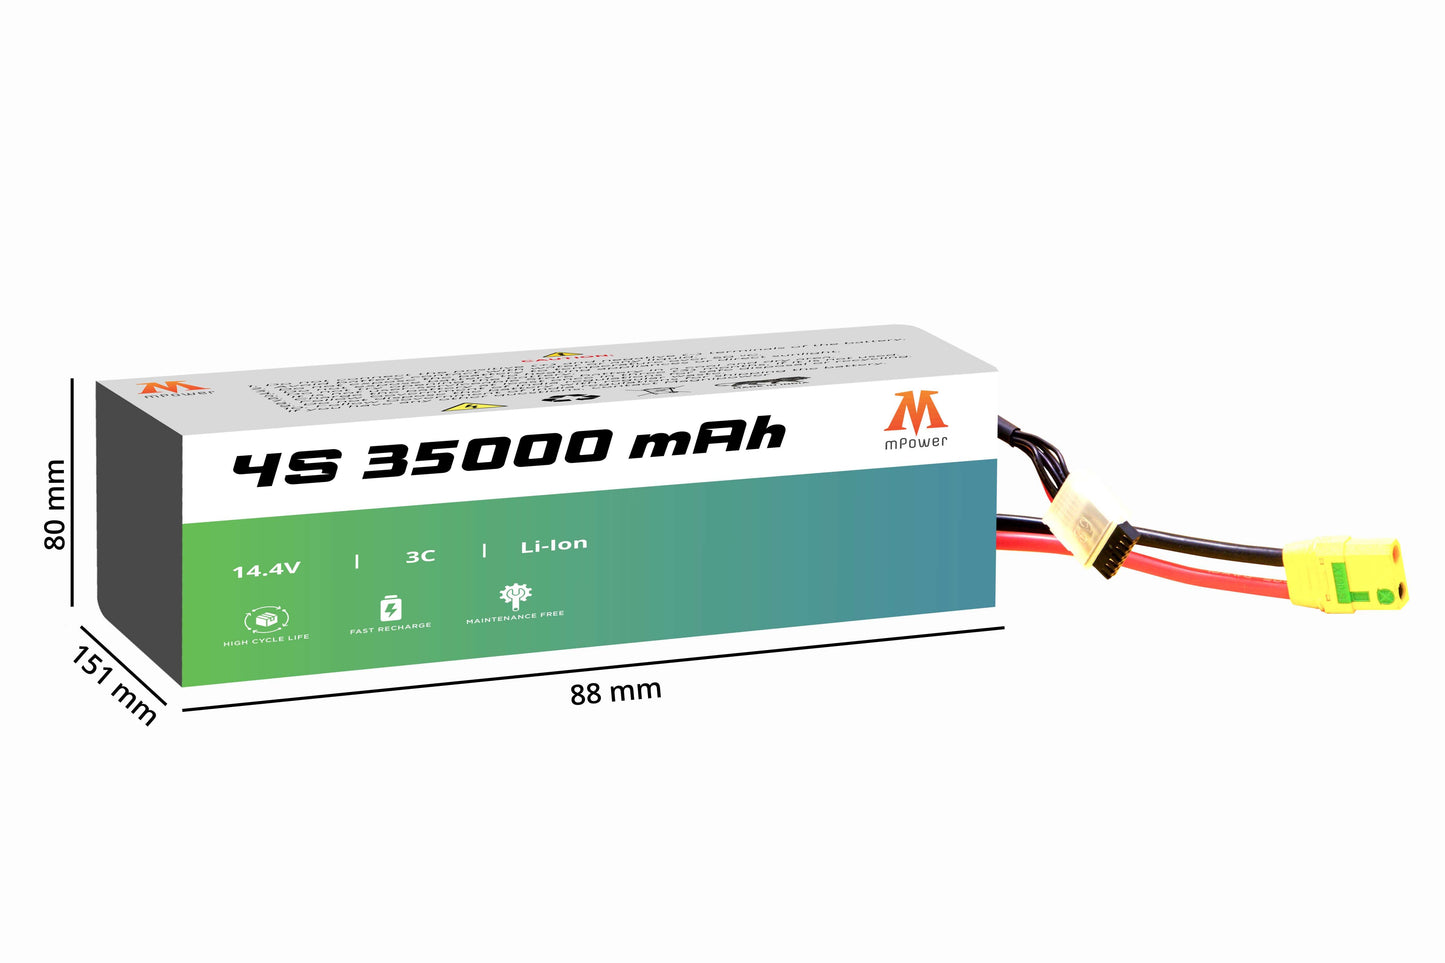 mPower 4S 35000mAh Lithium-Ion Battery for Surveillance Drones